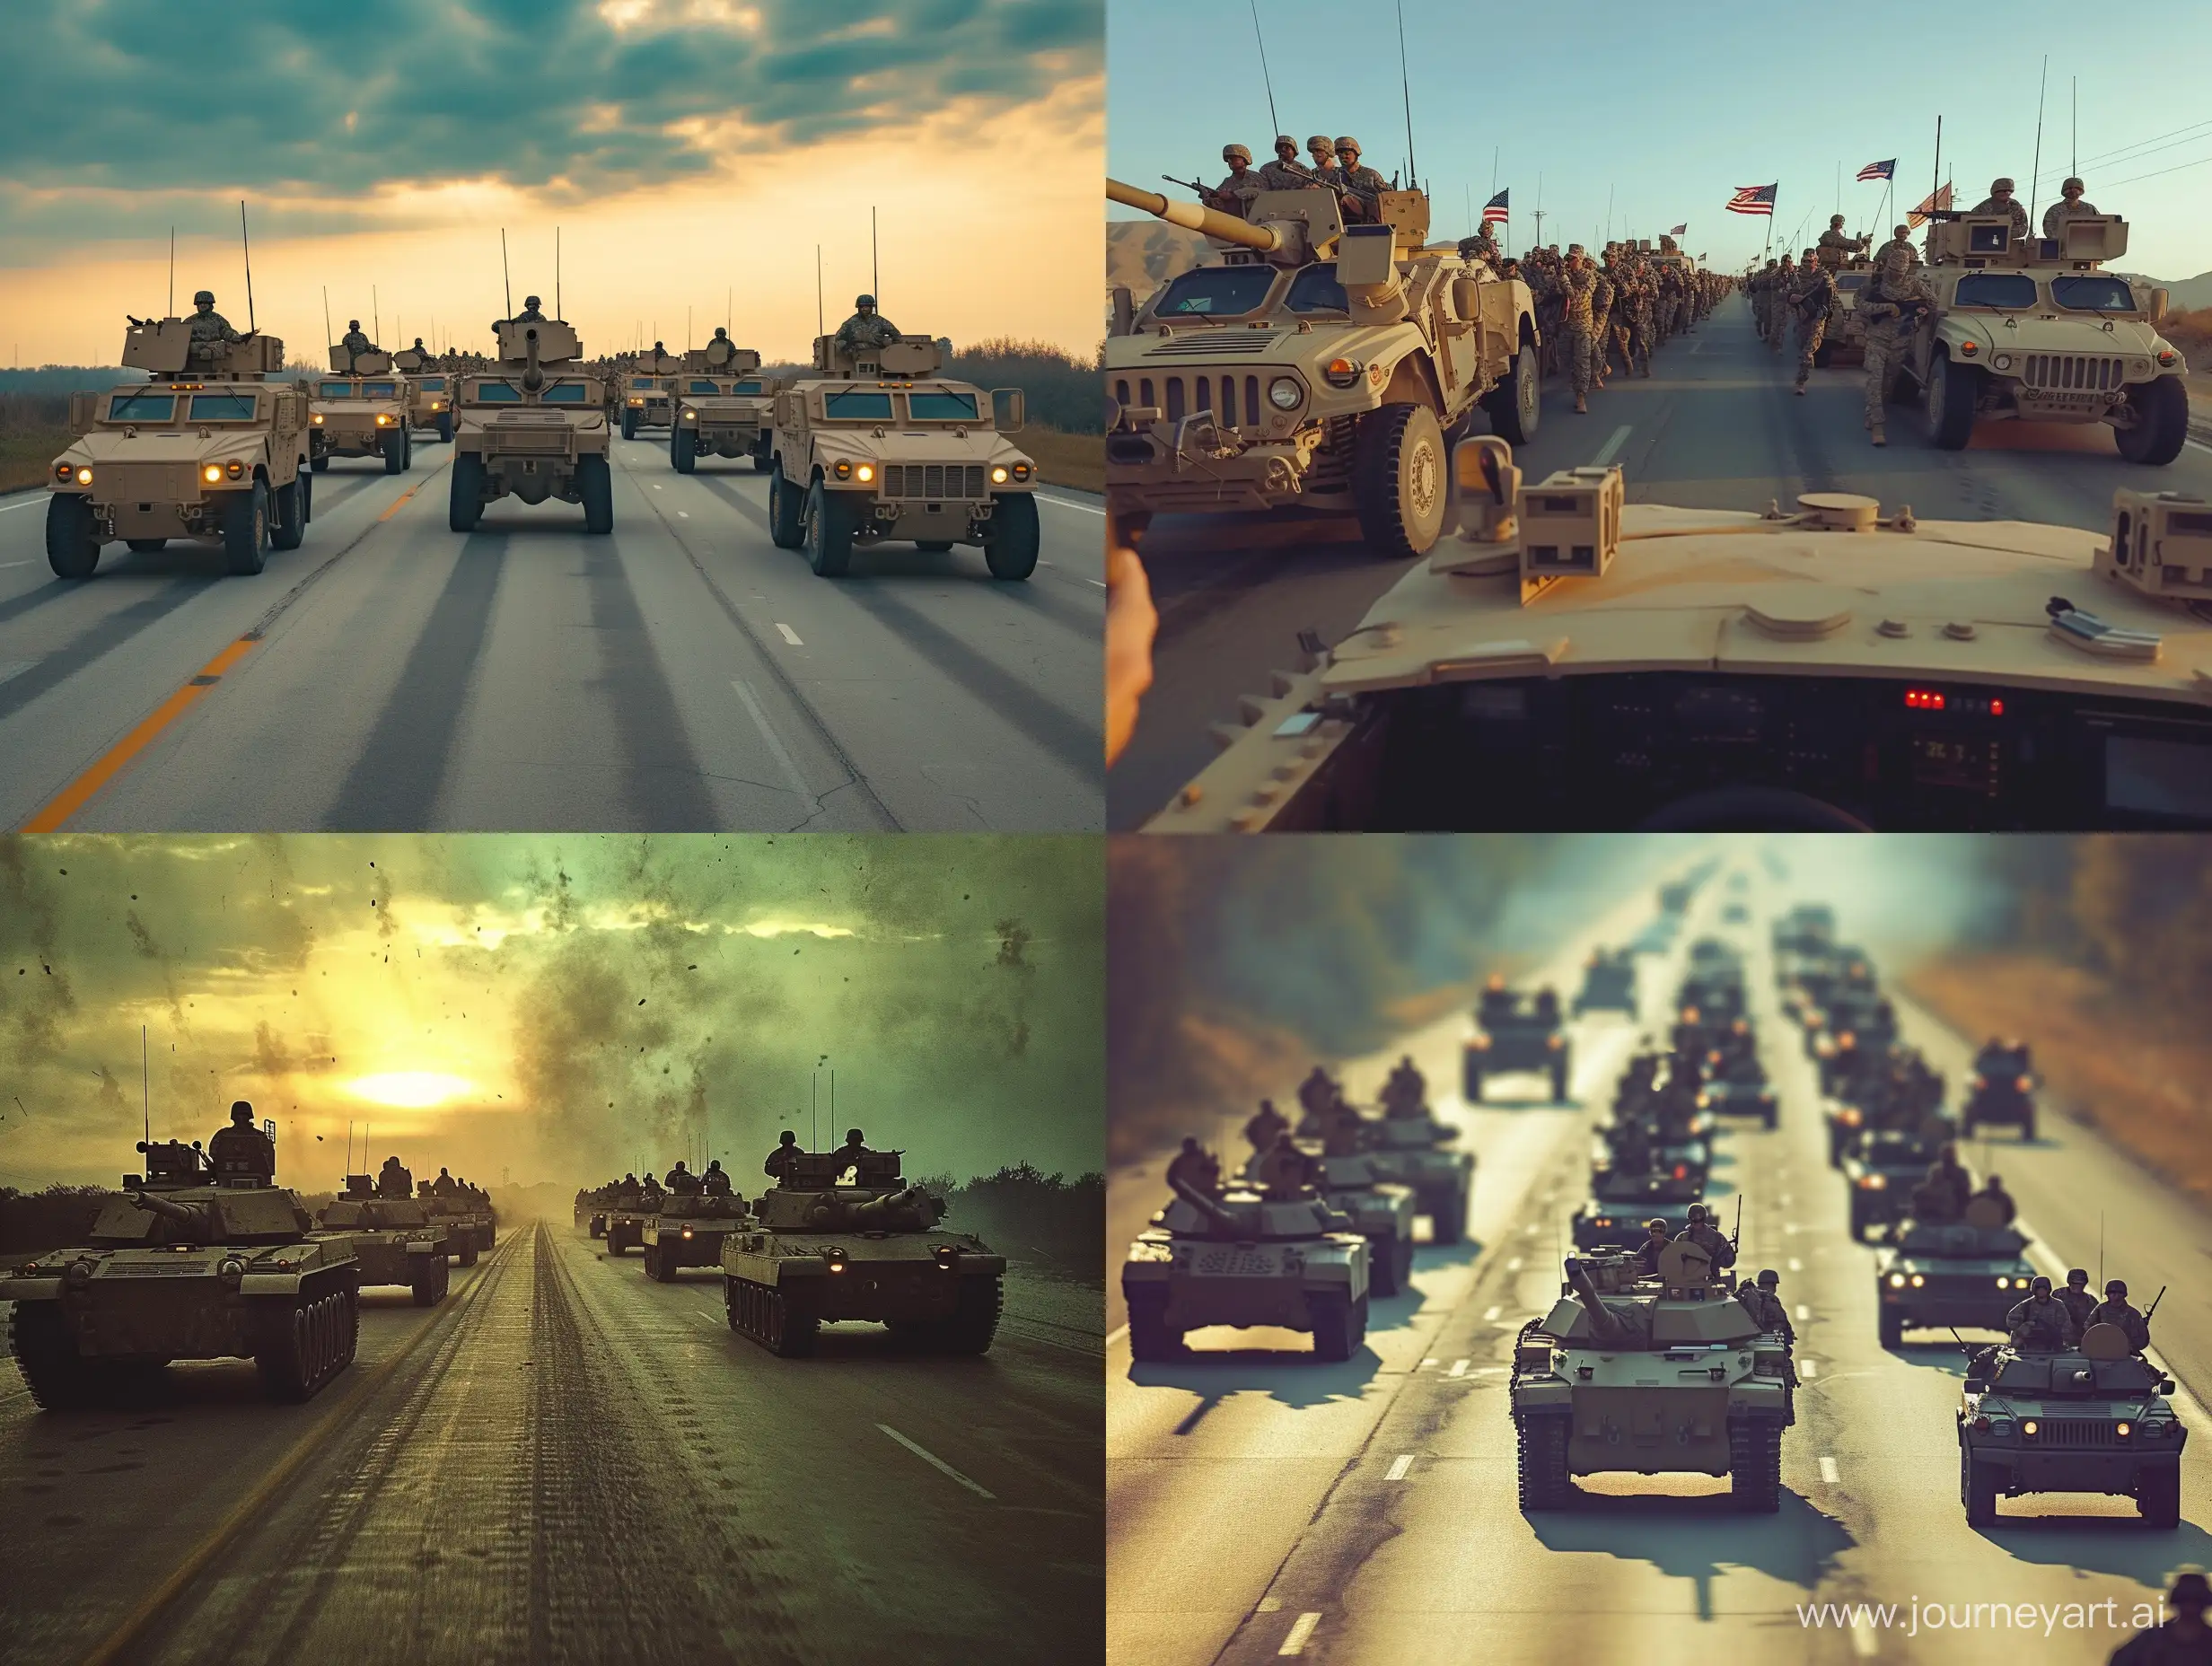 The US army is marching down the road with vehicles and tanks, captured on an iPhone. Color correction has been applied to enhance the visual quality of the image.

